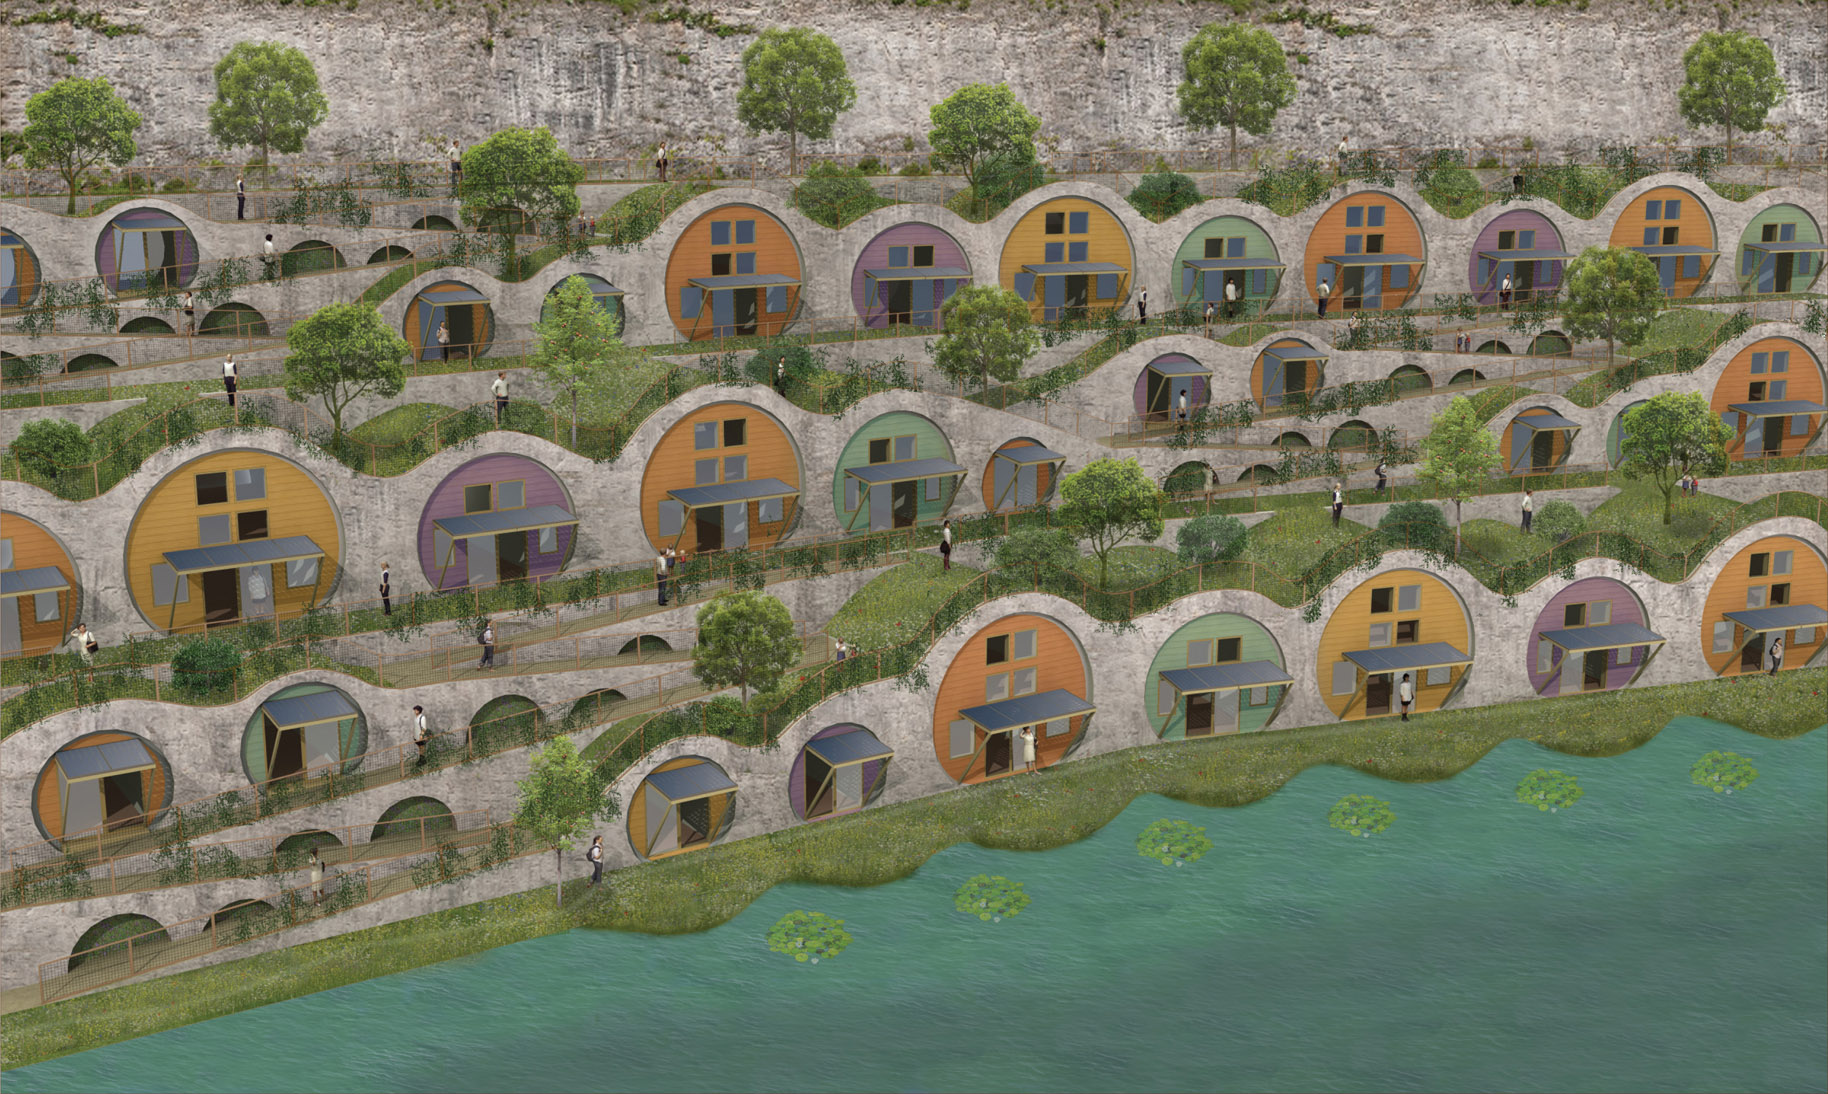 14.3 New terraces create earth-sheltered ‘hobbit’ holes.